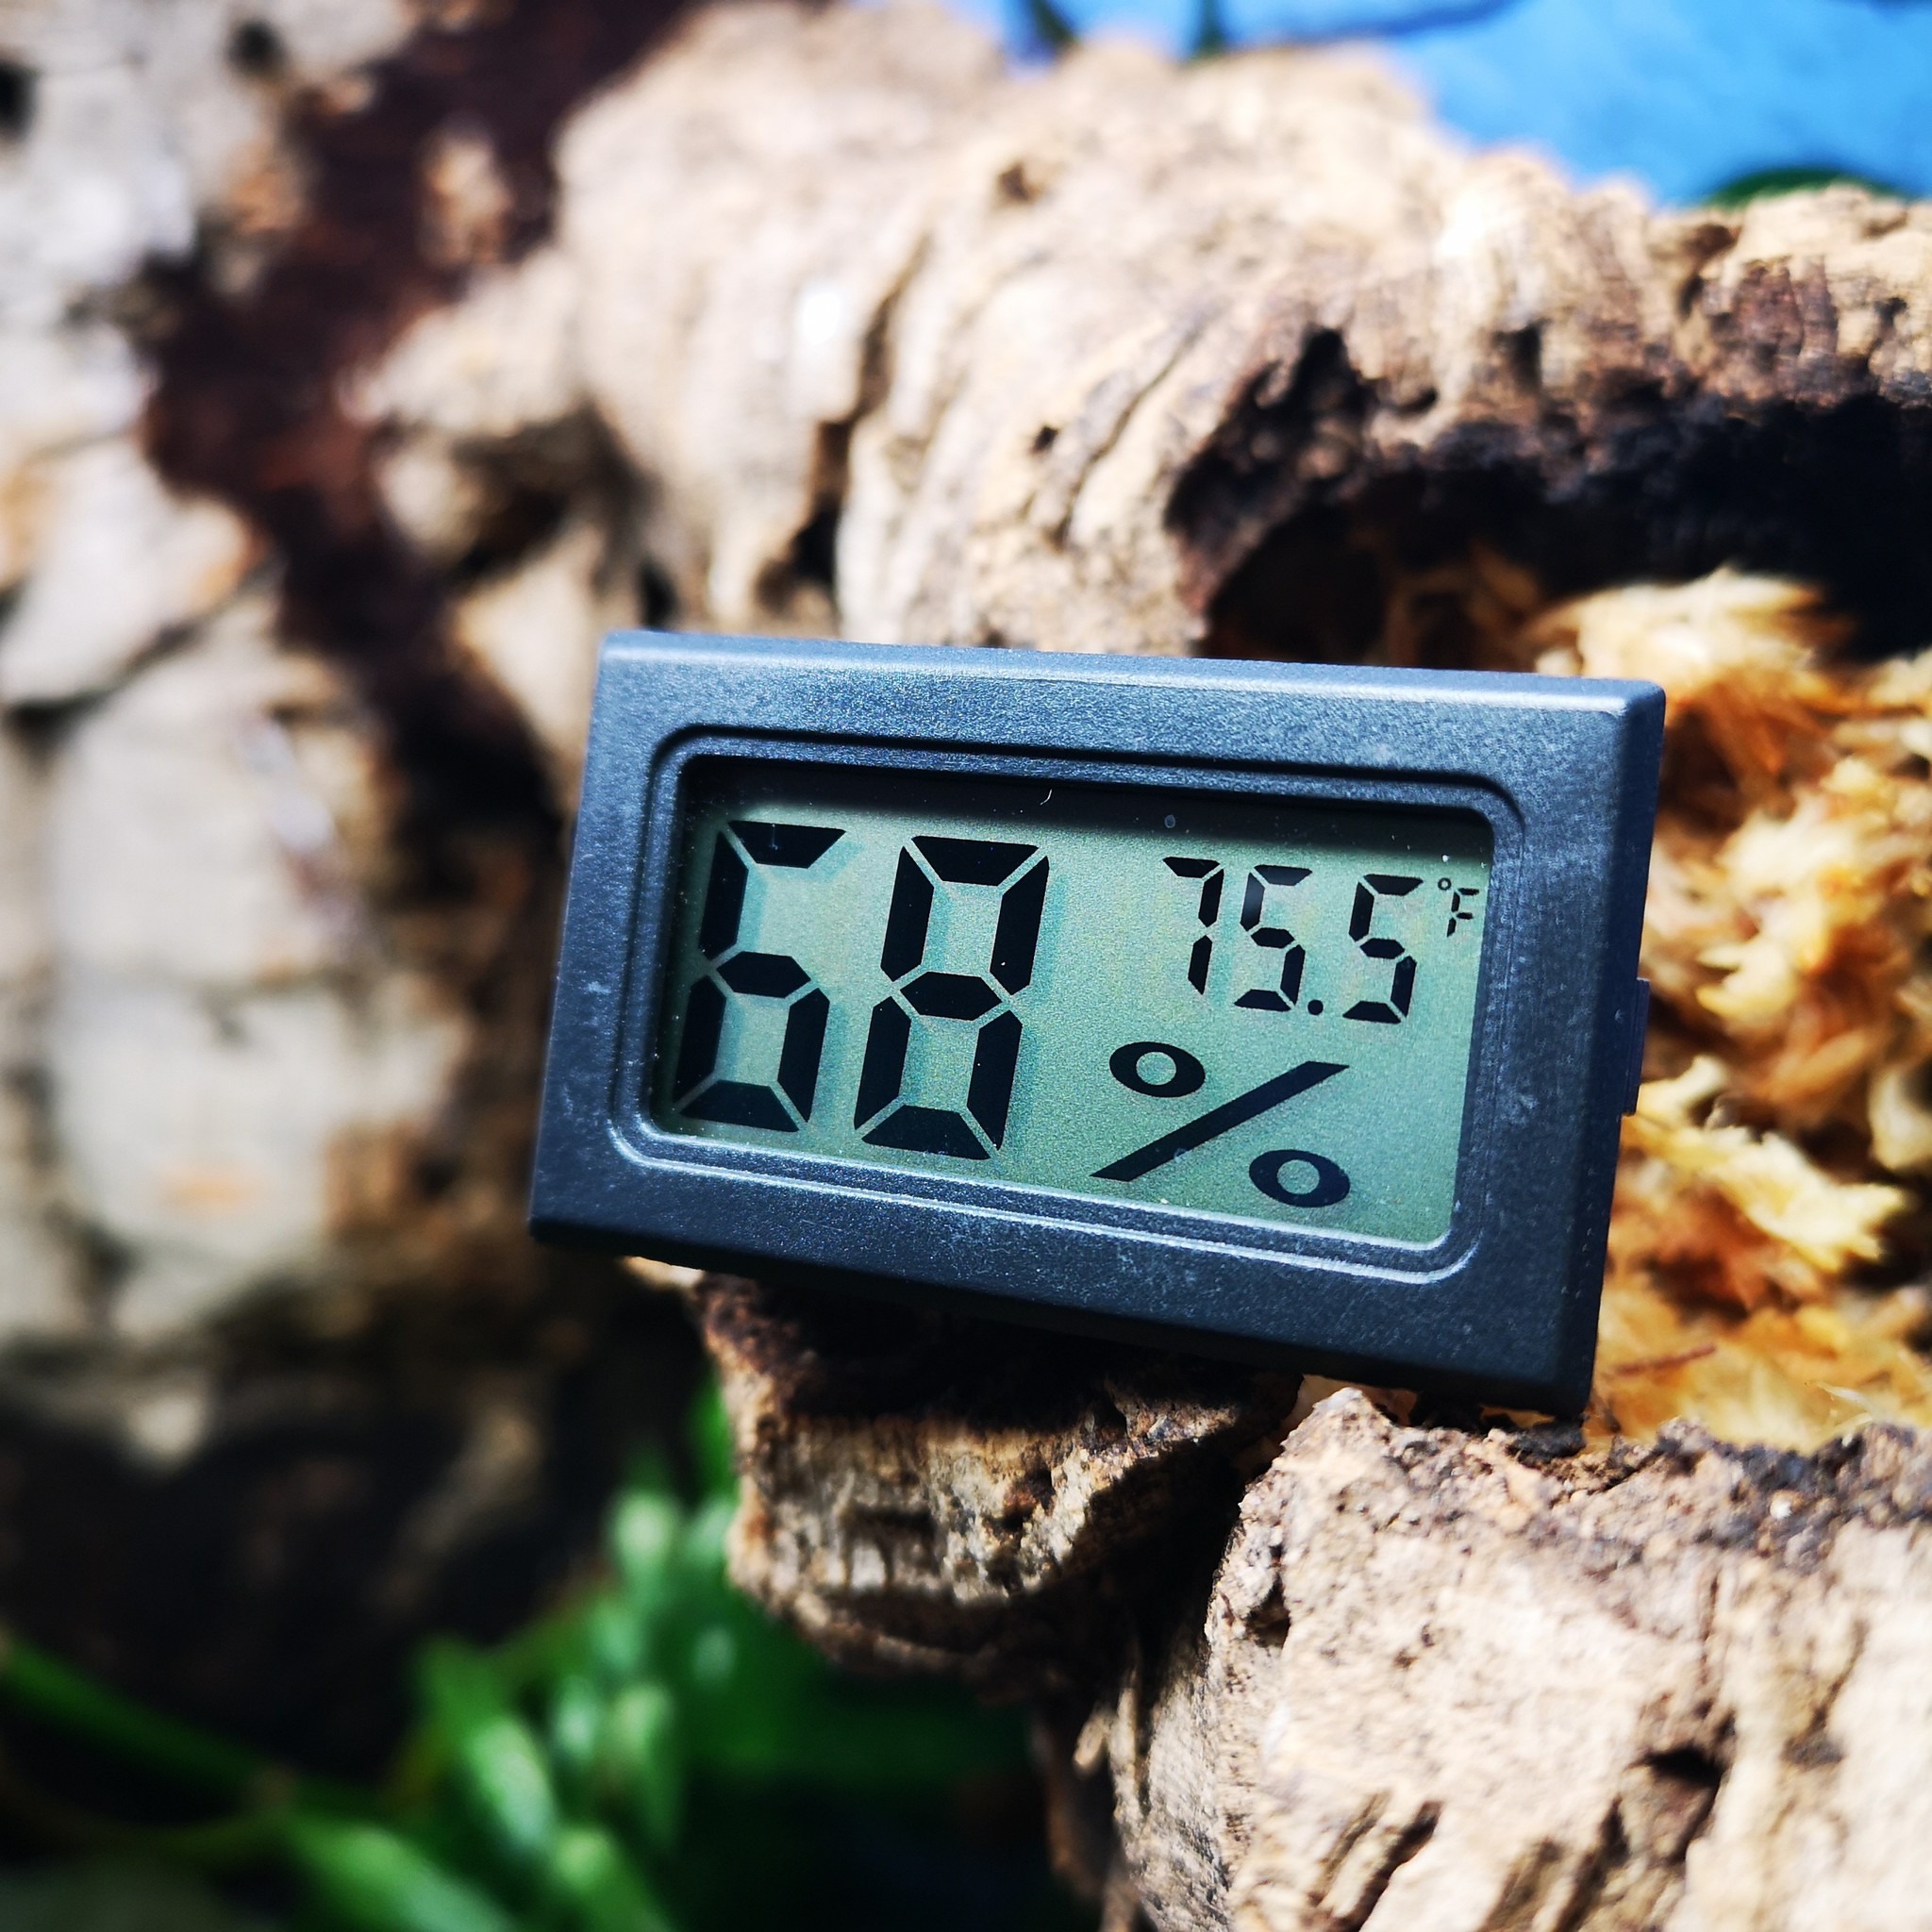 Repti Zoo 3-Channels Wireless Reptile Thermometer and Humidity Gauge Large Screen Display